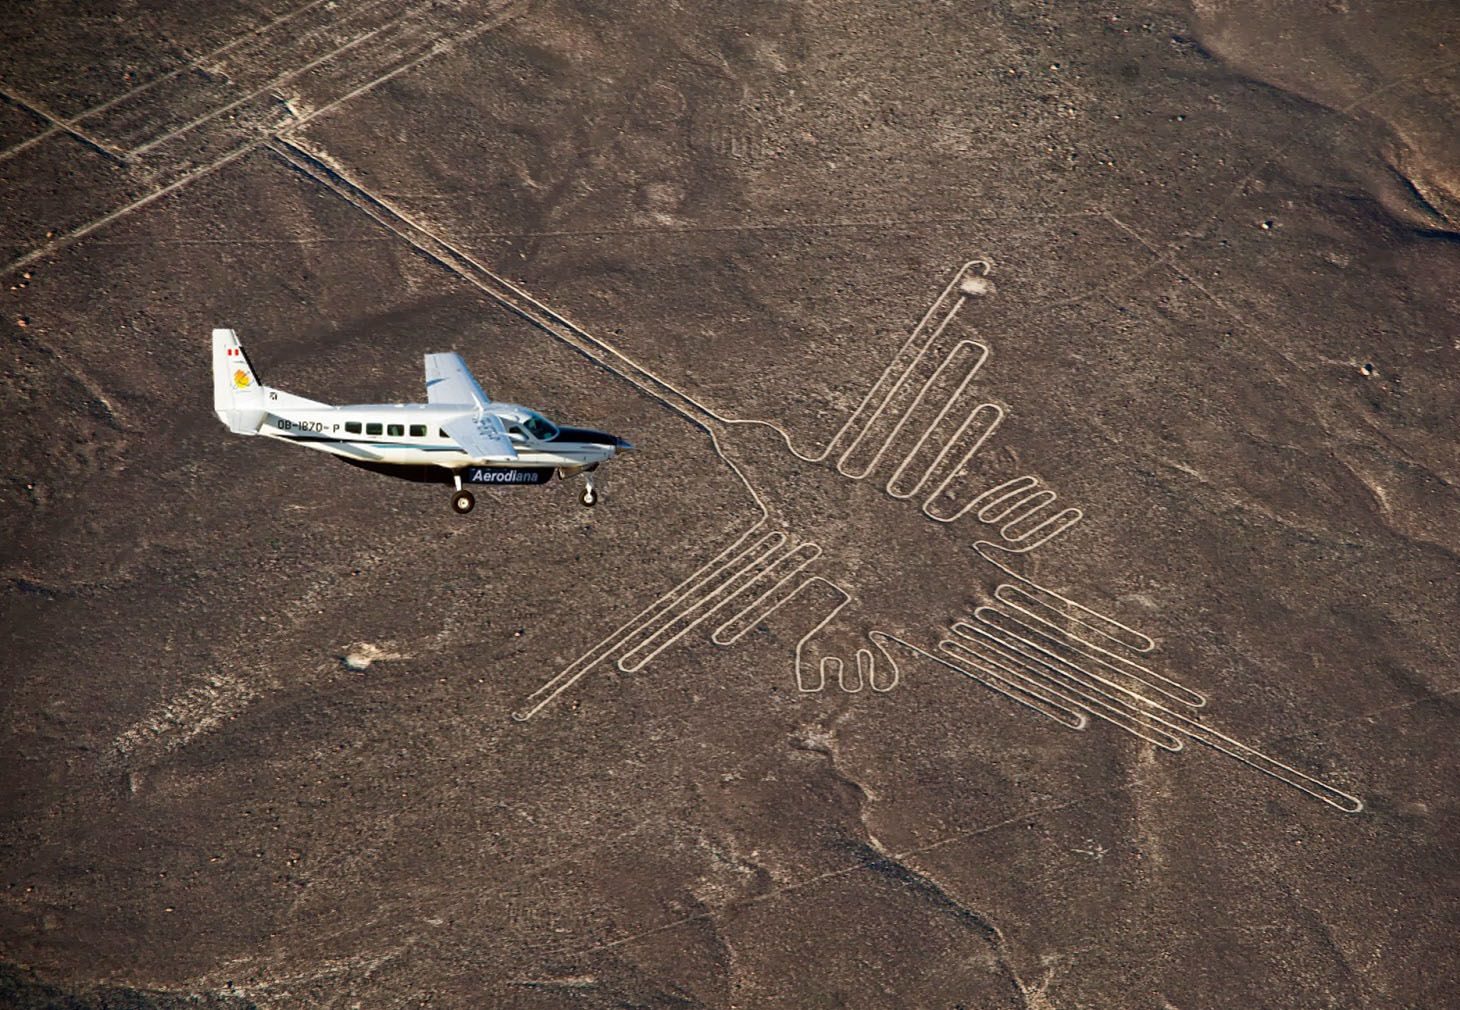 What to bring to Ica with overflight to the nazca lines?